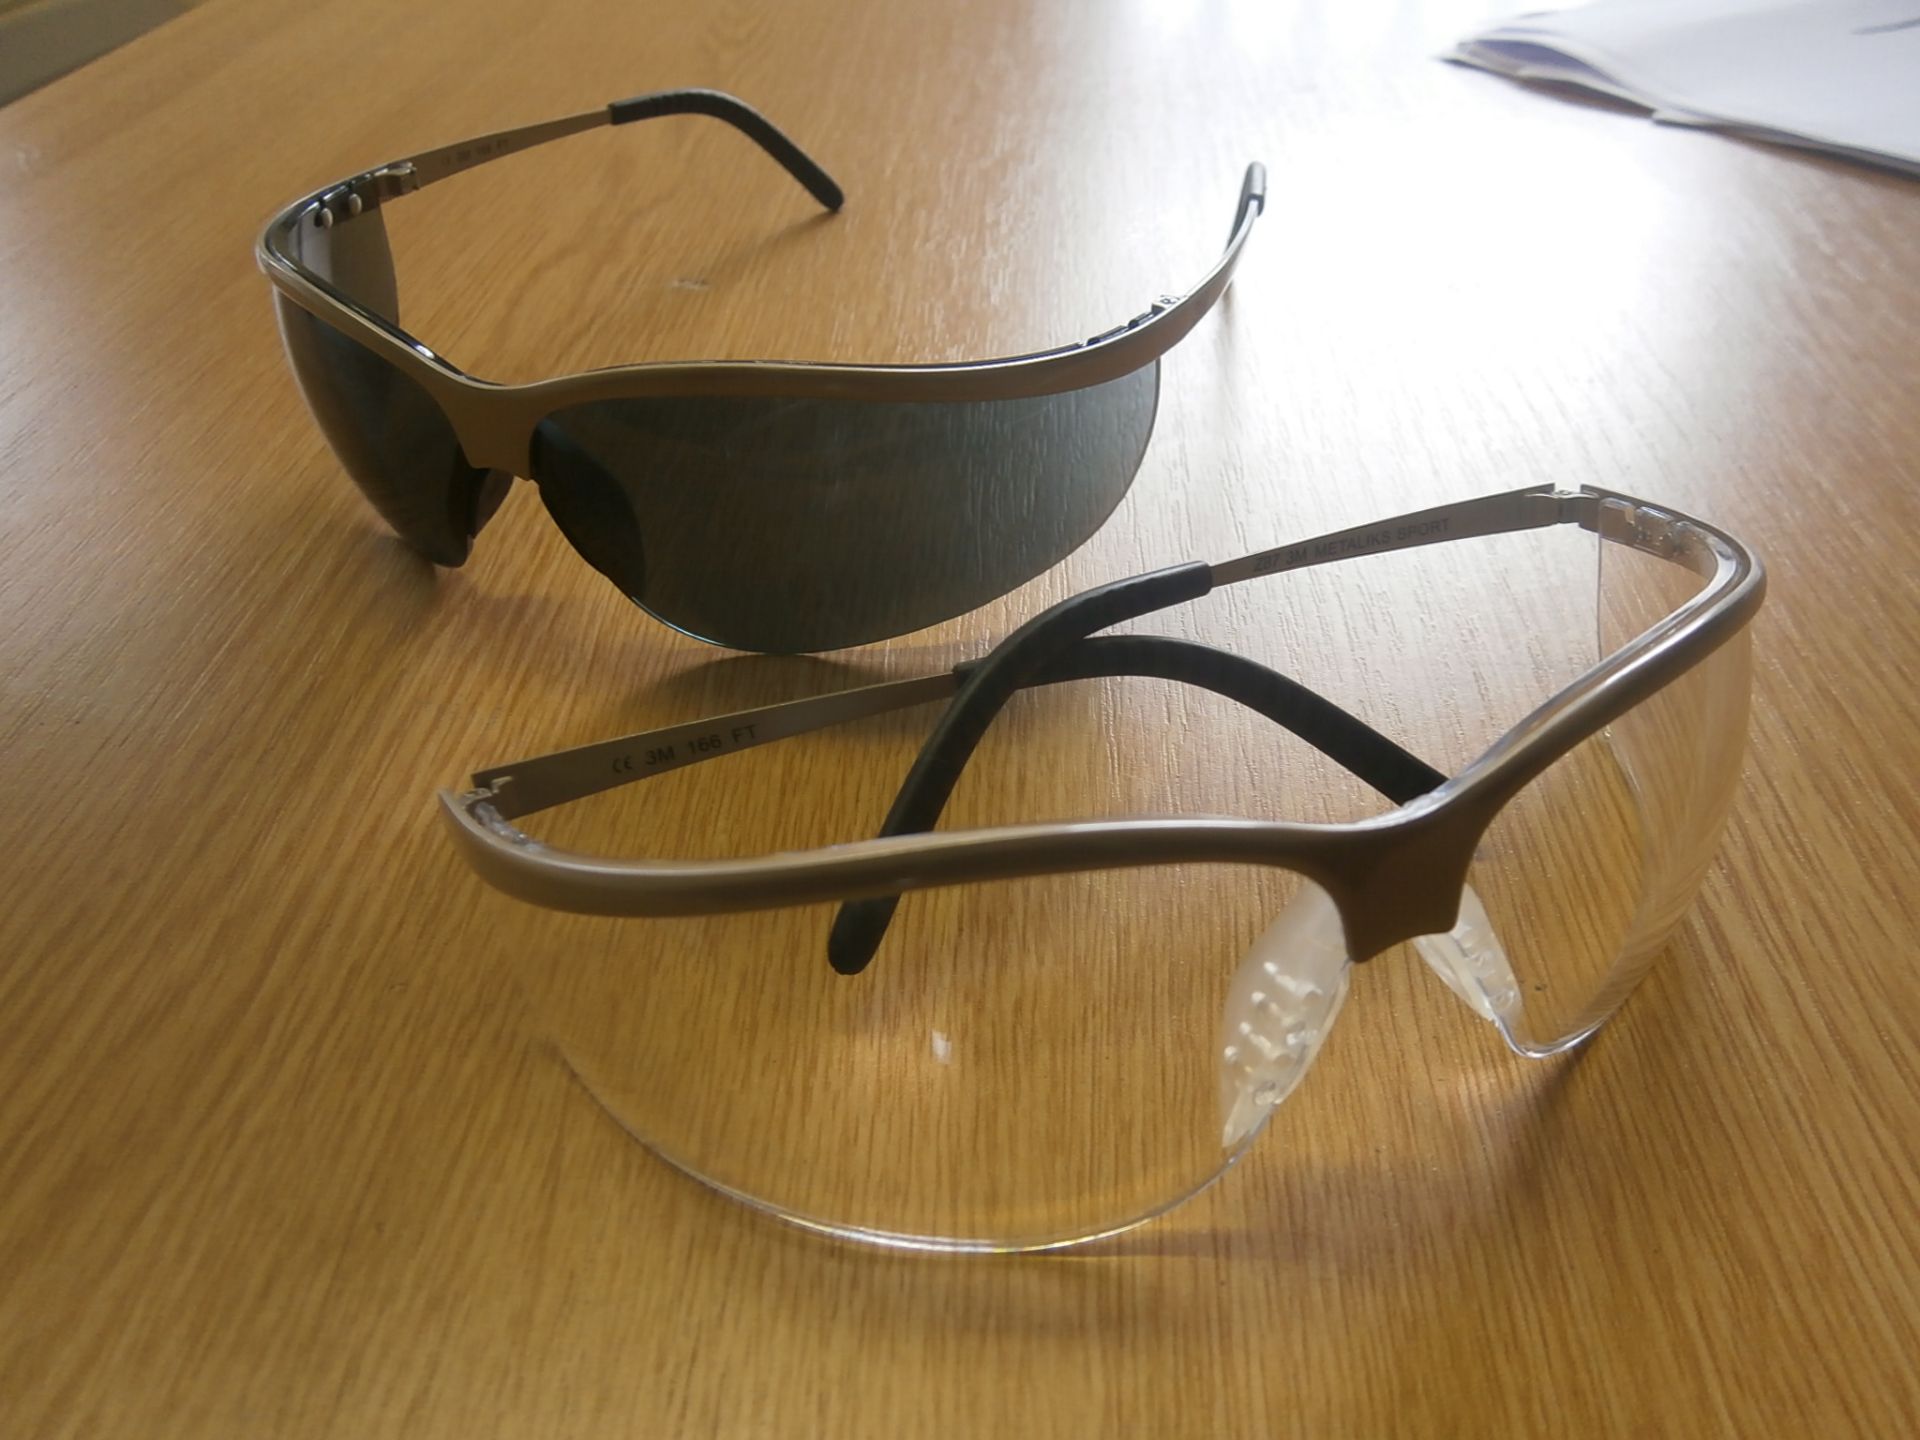 2 x Boxes of 3M Saftey Spectacles (20 Per Box - RRP £4.99 Each, Total £199.60) (RB)